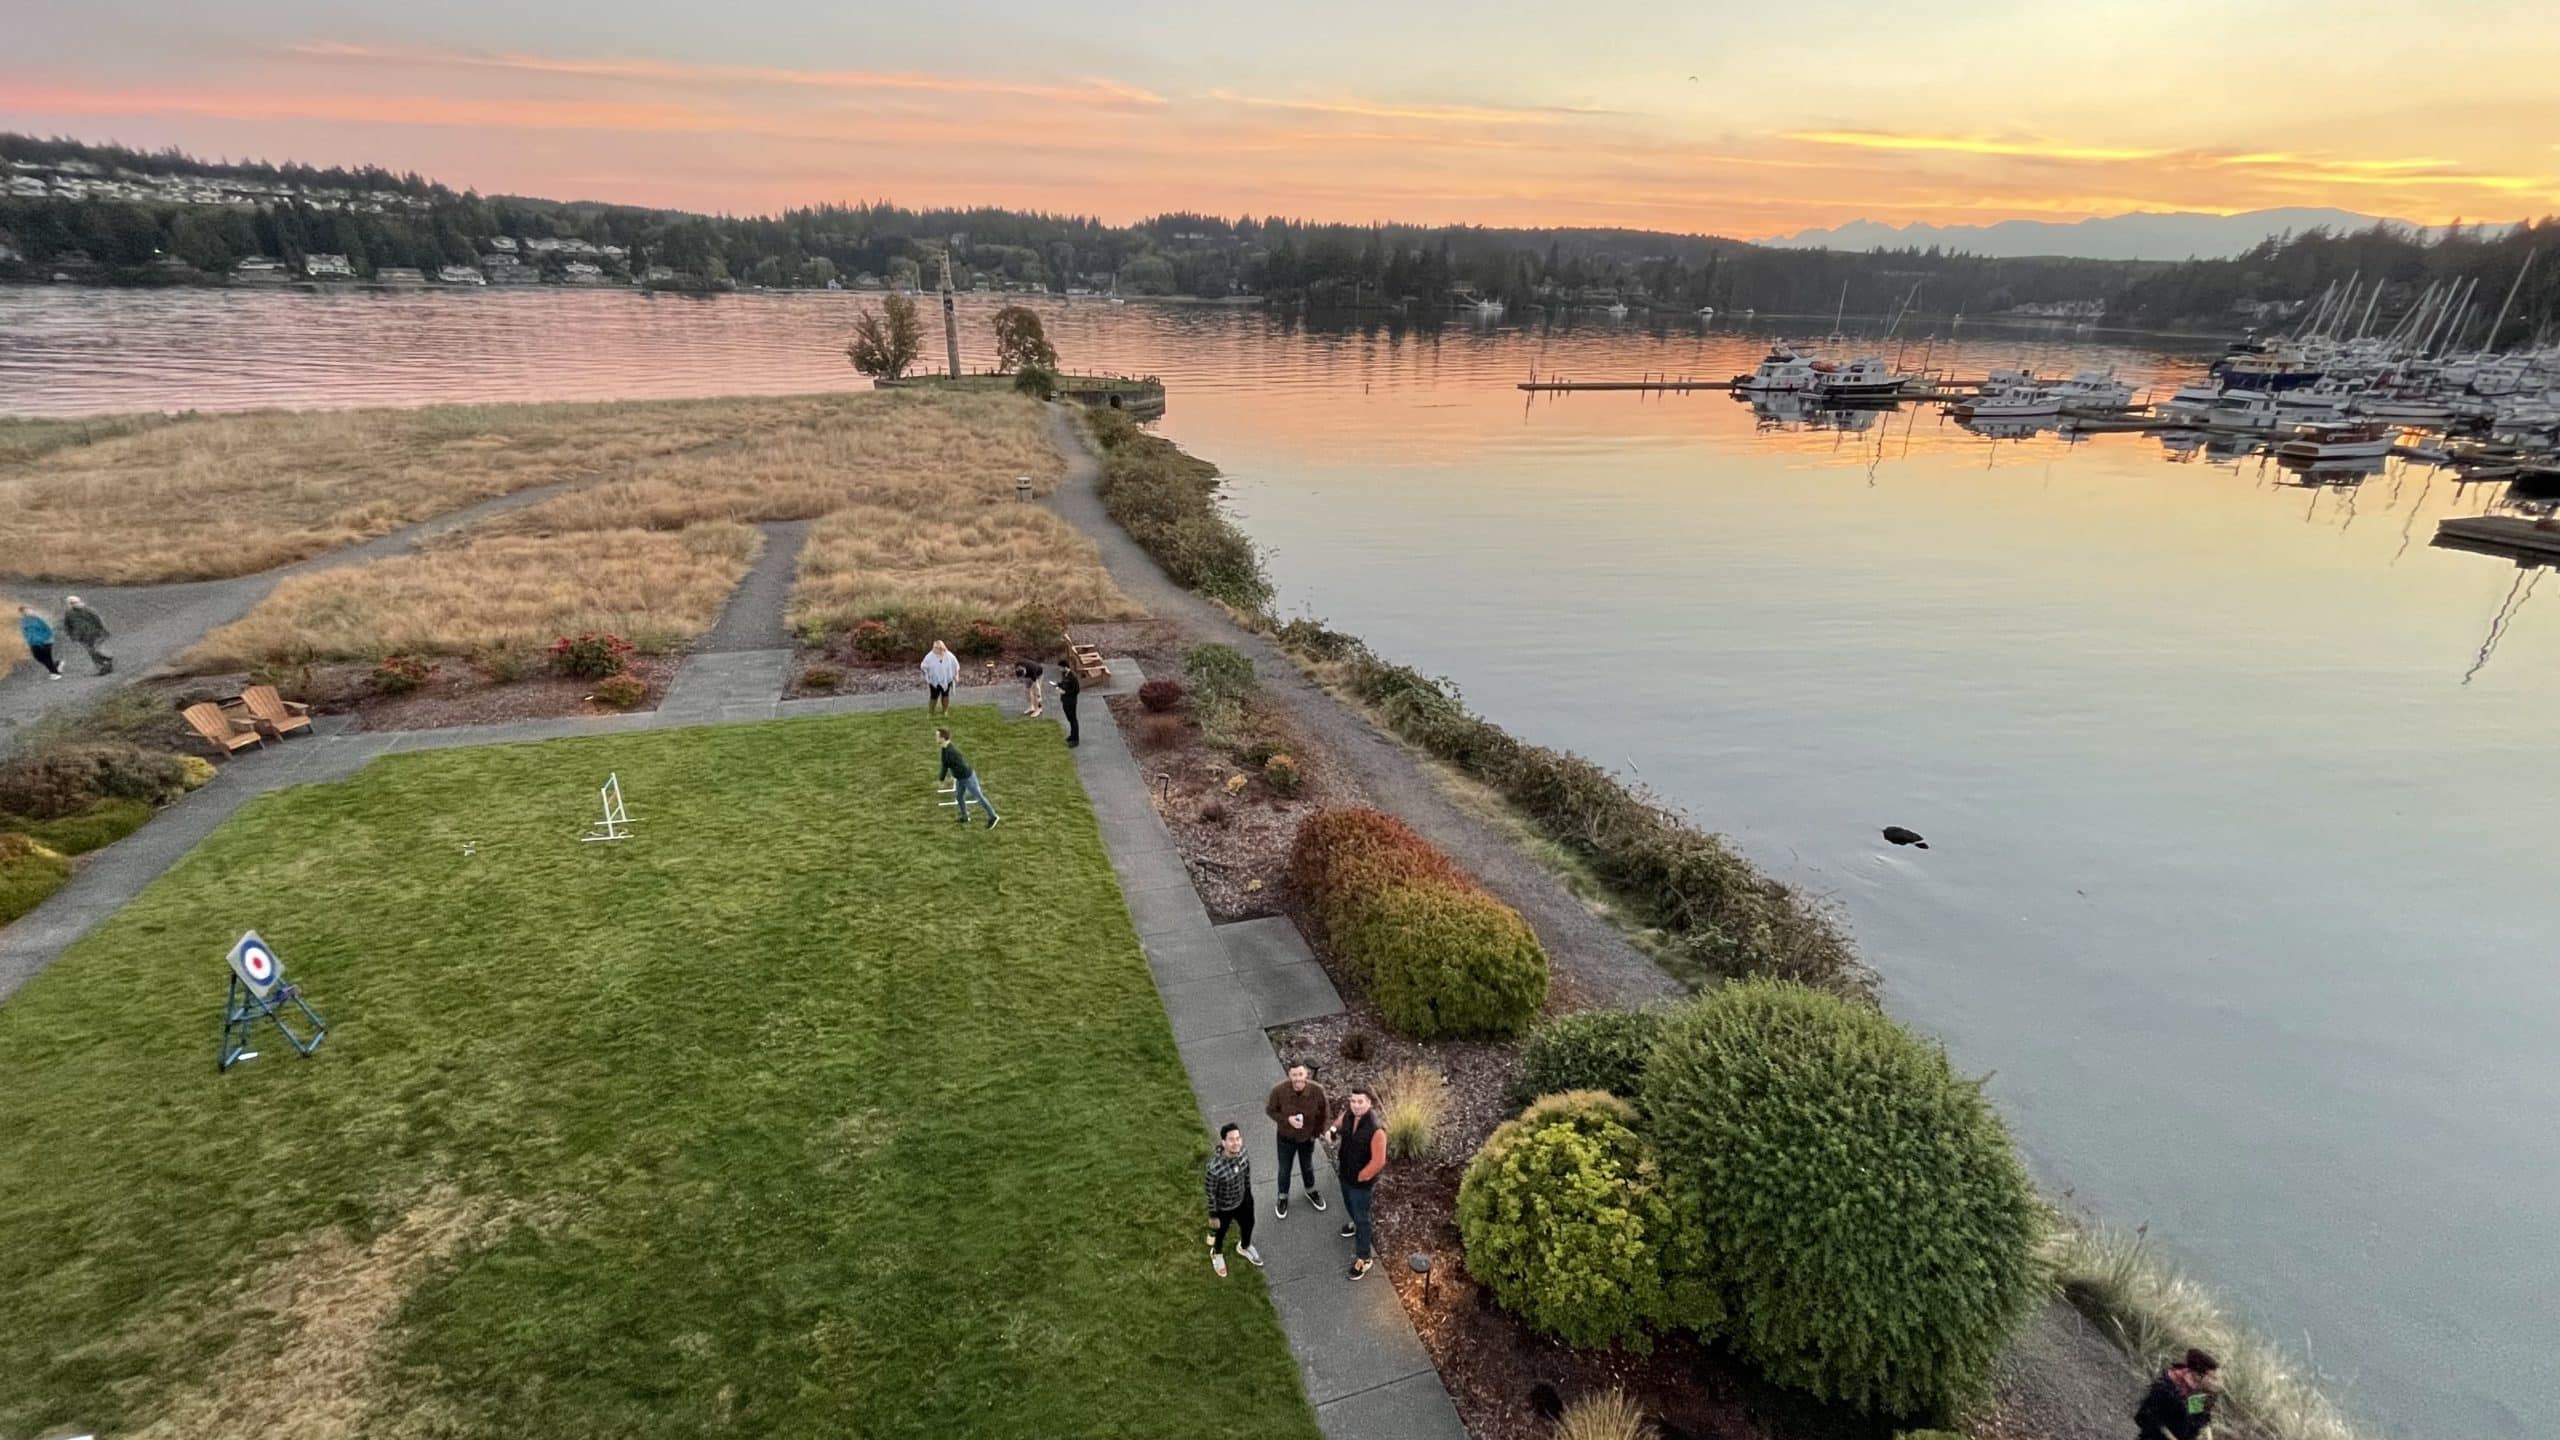 TUNE employees hang out on the lawn and watch the sunset during the retreat